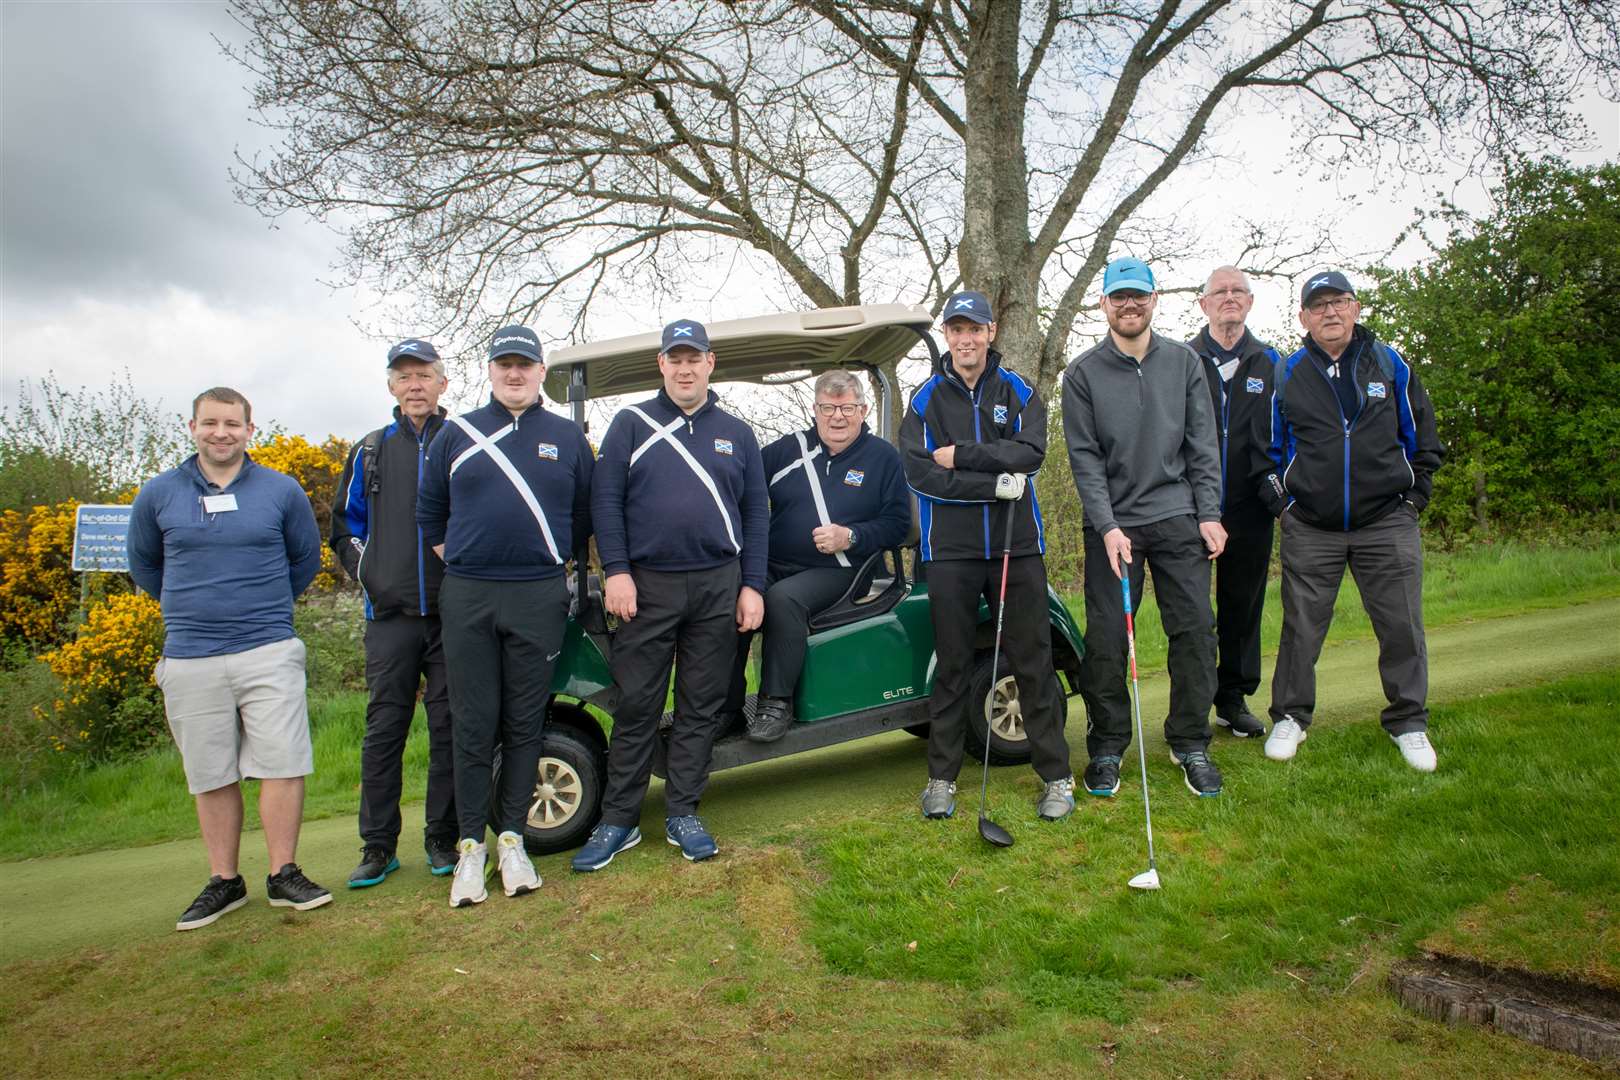 Organiser Ronnie Mitchell (seated) with some of the golfers and caddies taking part. Picture: Callum Mackay